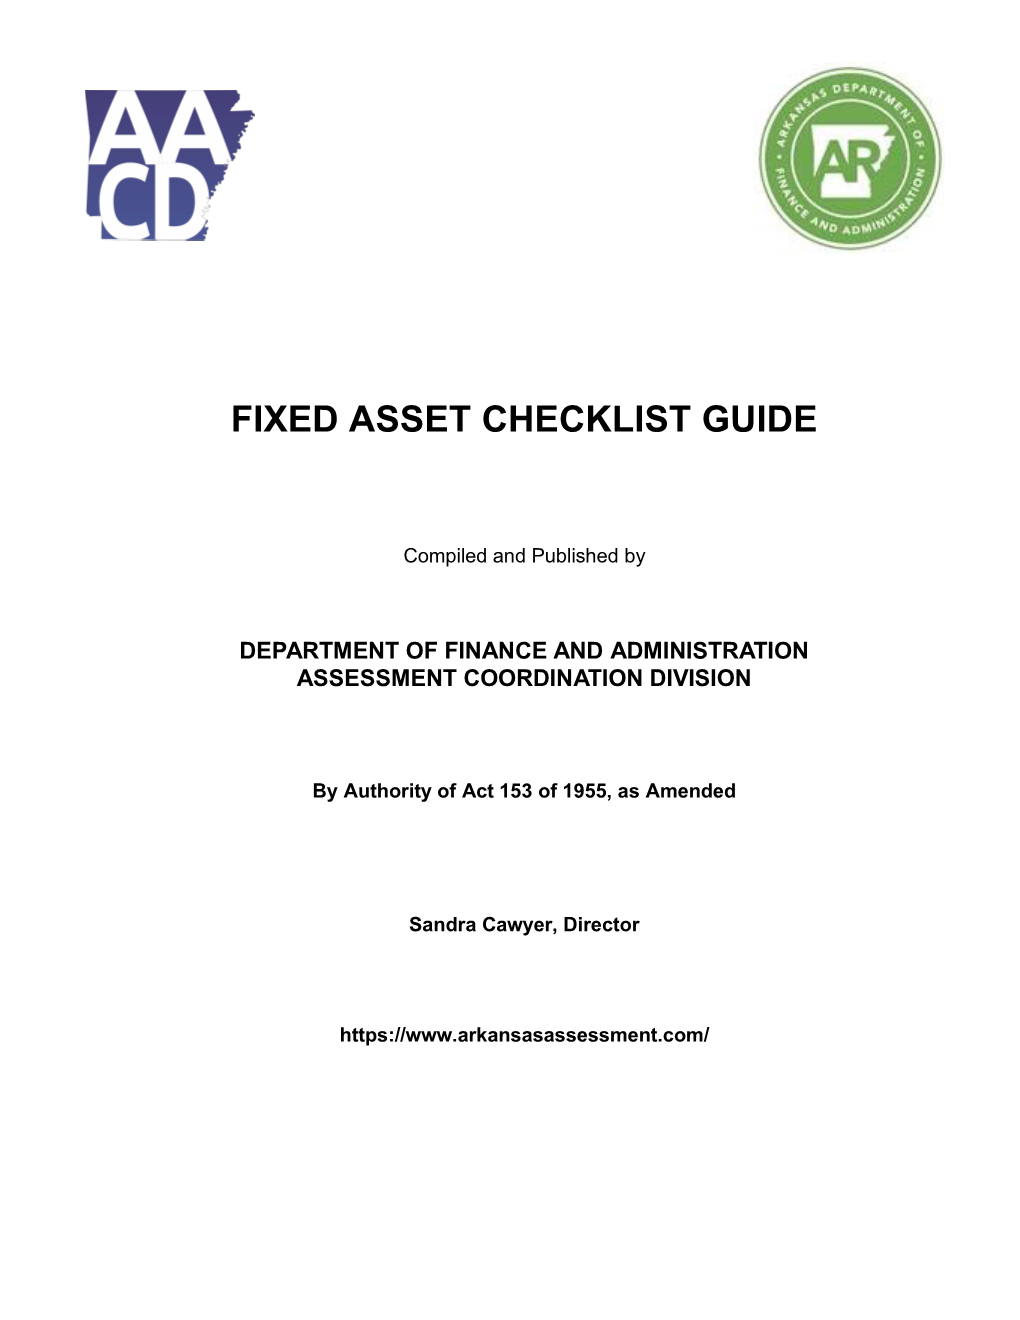 Fixed Asset Checklist Guide